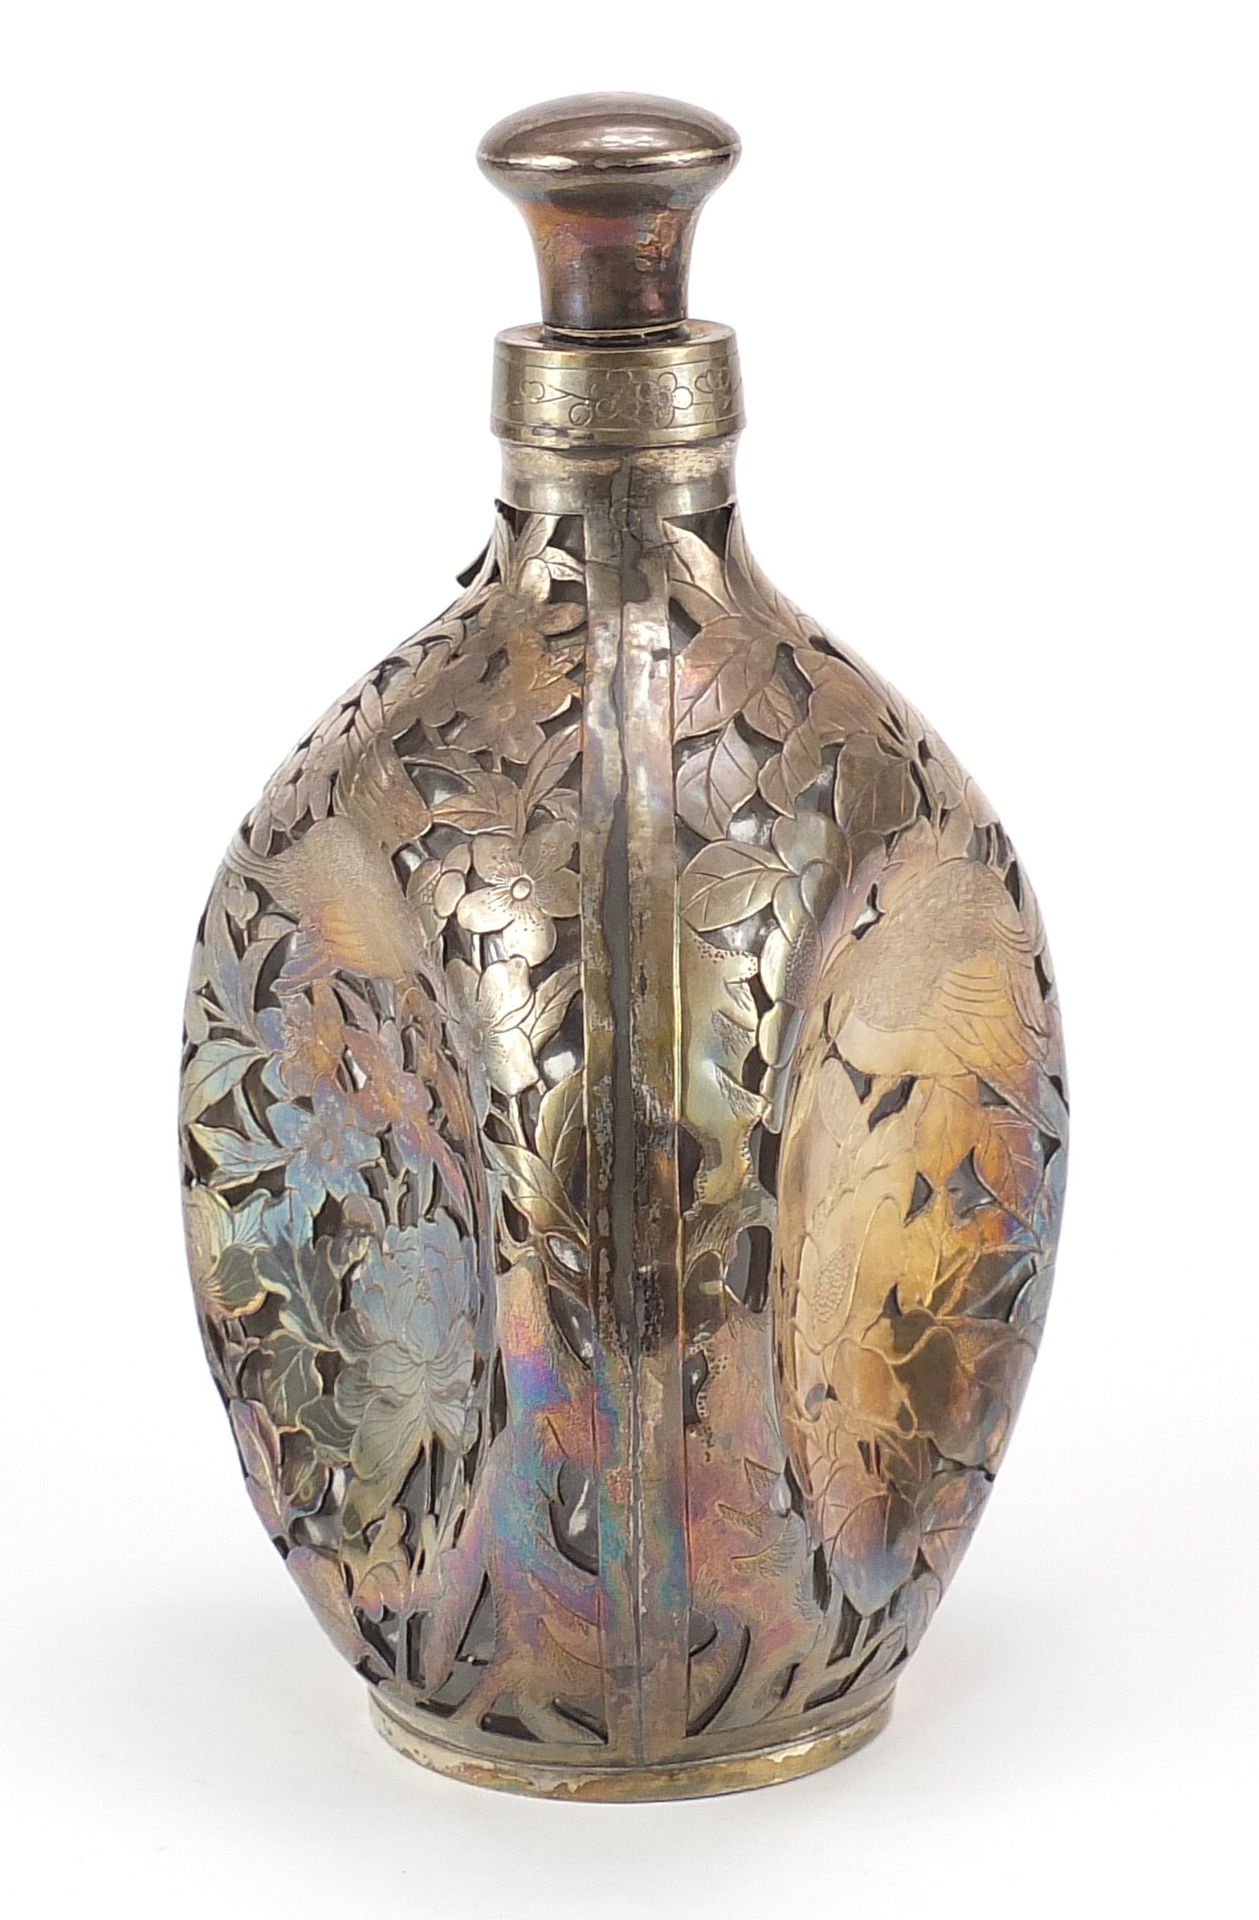 Chinese silver overlaid glass decanter with gin label, pierced and engraved all over with birds - Image 2 of 4